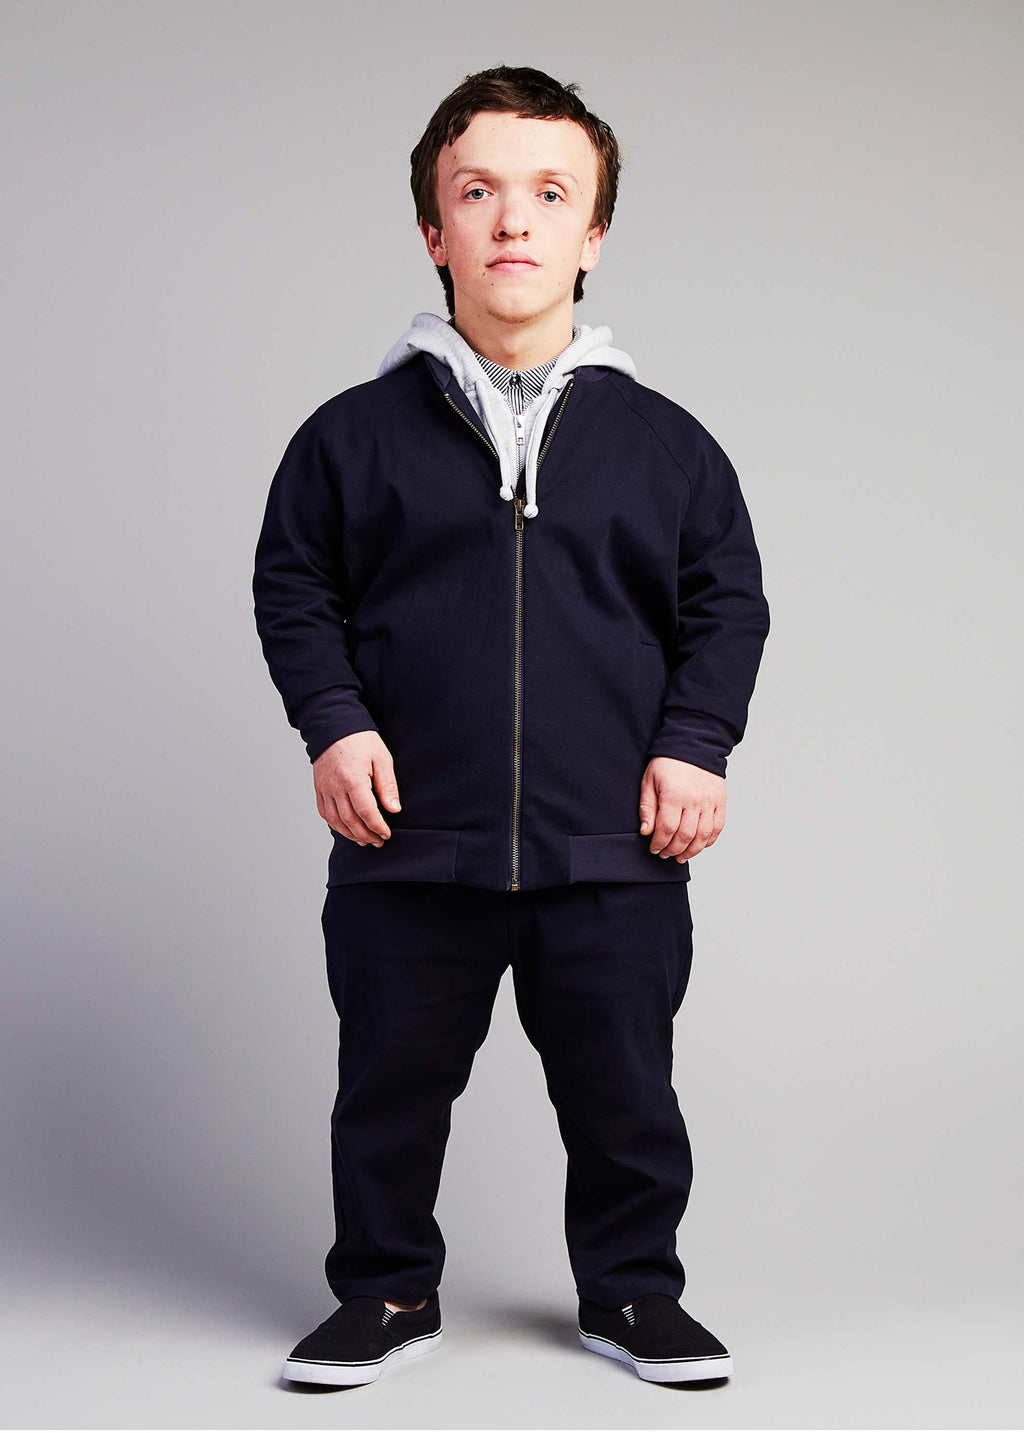 man with dwarfism wearing dark blue college jacket and matching outfit